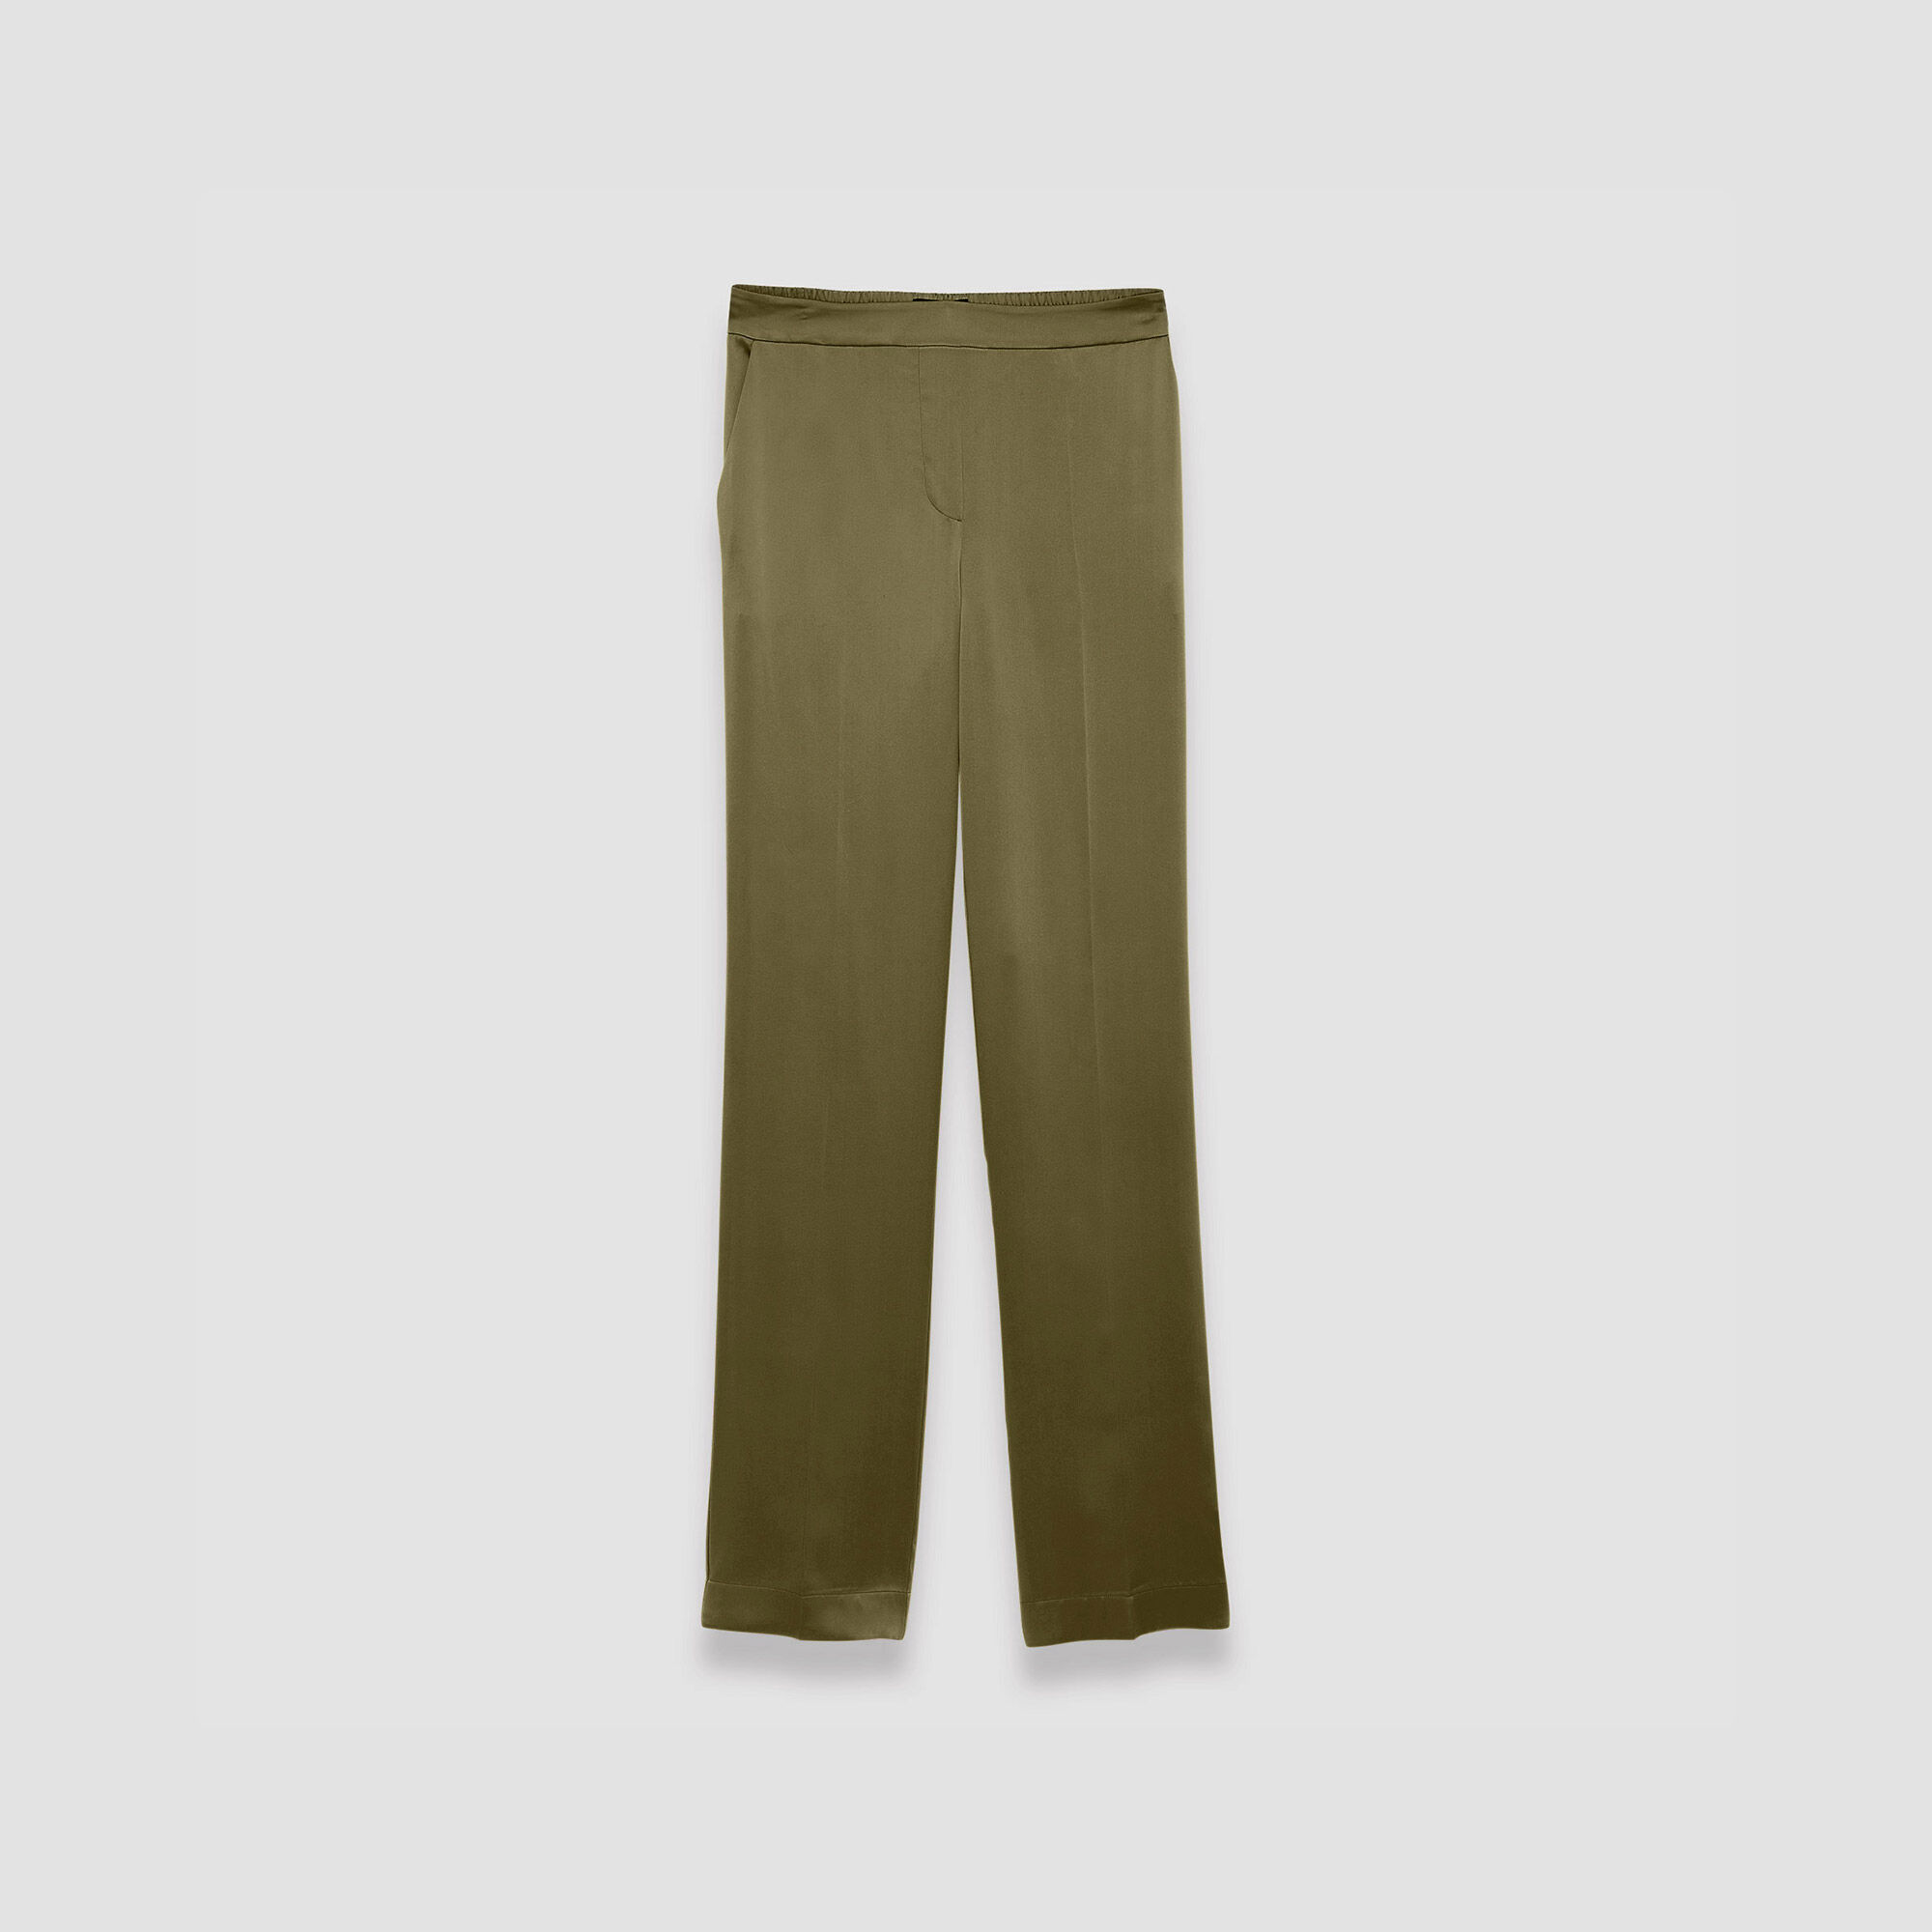 Men's Cotton Dark Olive Green Plain Pant, Size: 28-42 at Rs 320 in Ludhiana